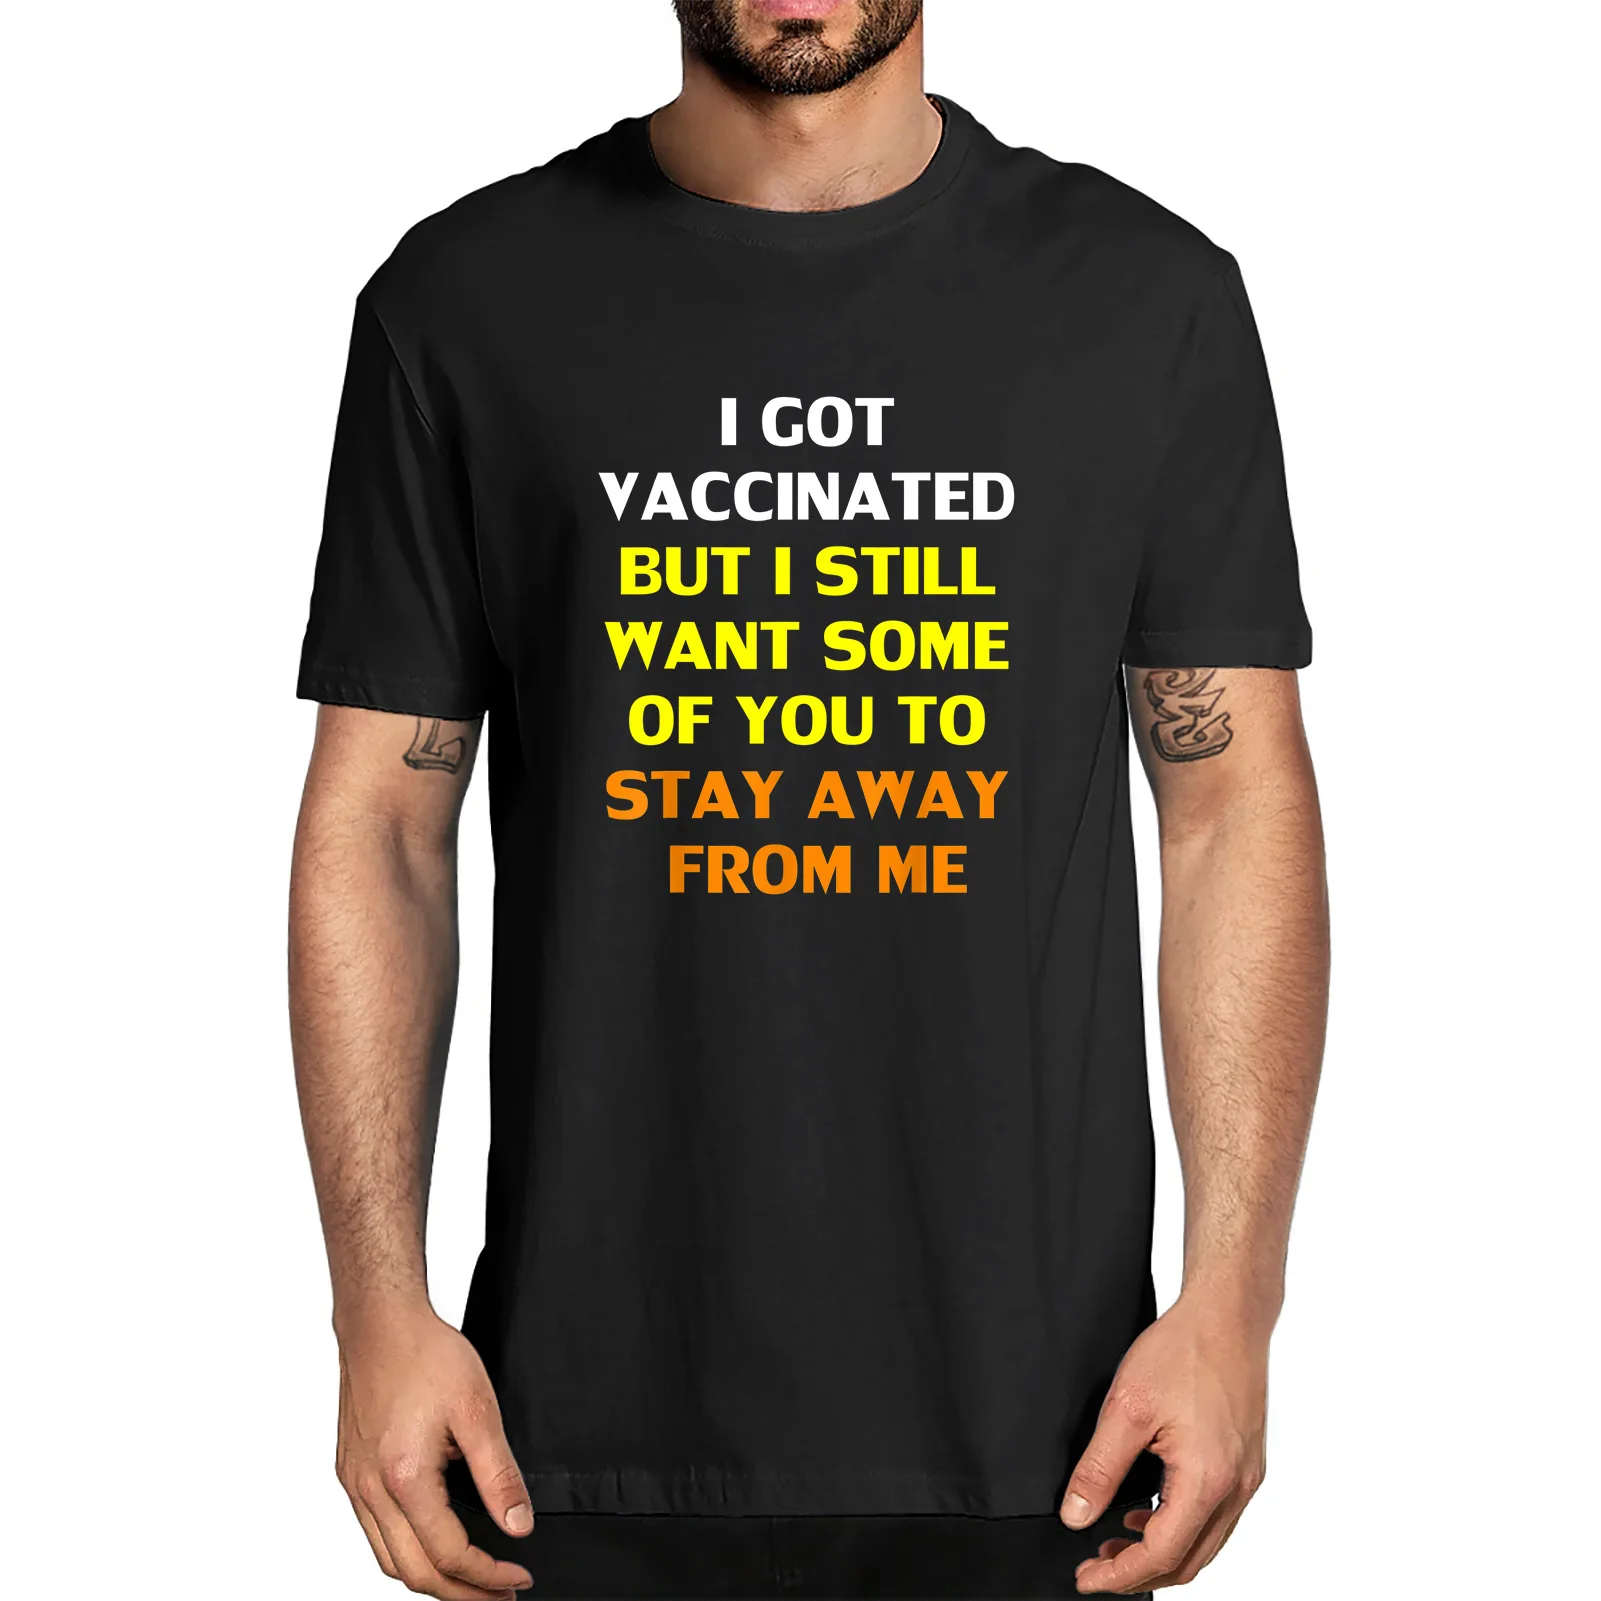 

Funny Got Vaccinated But I Still Want You To Stay Away From Me Men's 100% Cotton Novelty T-Shirt Unisex Summer Humor Women